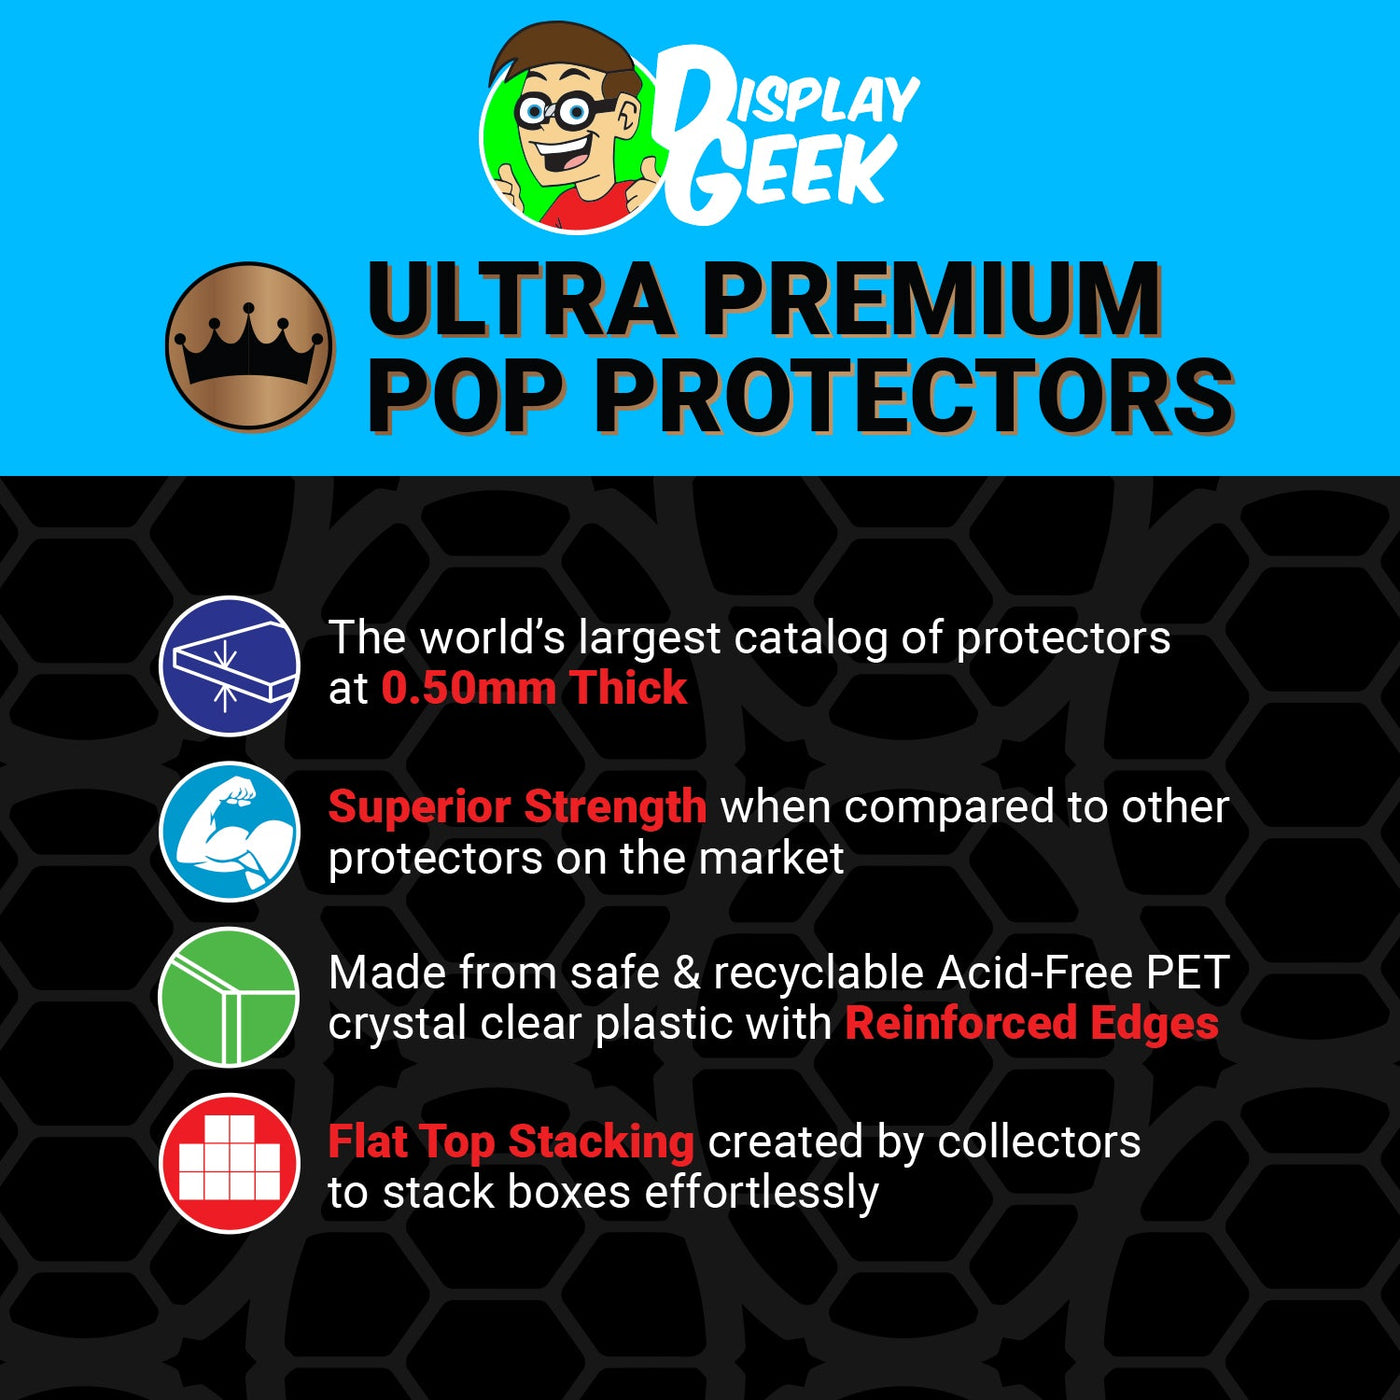 Pop Protector for Freddy Funko Southern California Gray Shirt SDCC on The Protector Guide App by Display Geek